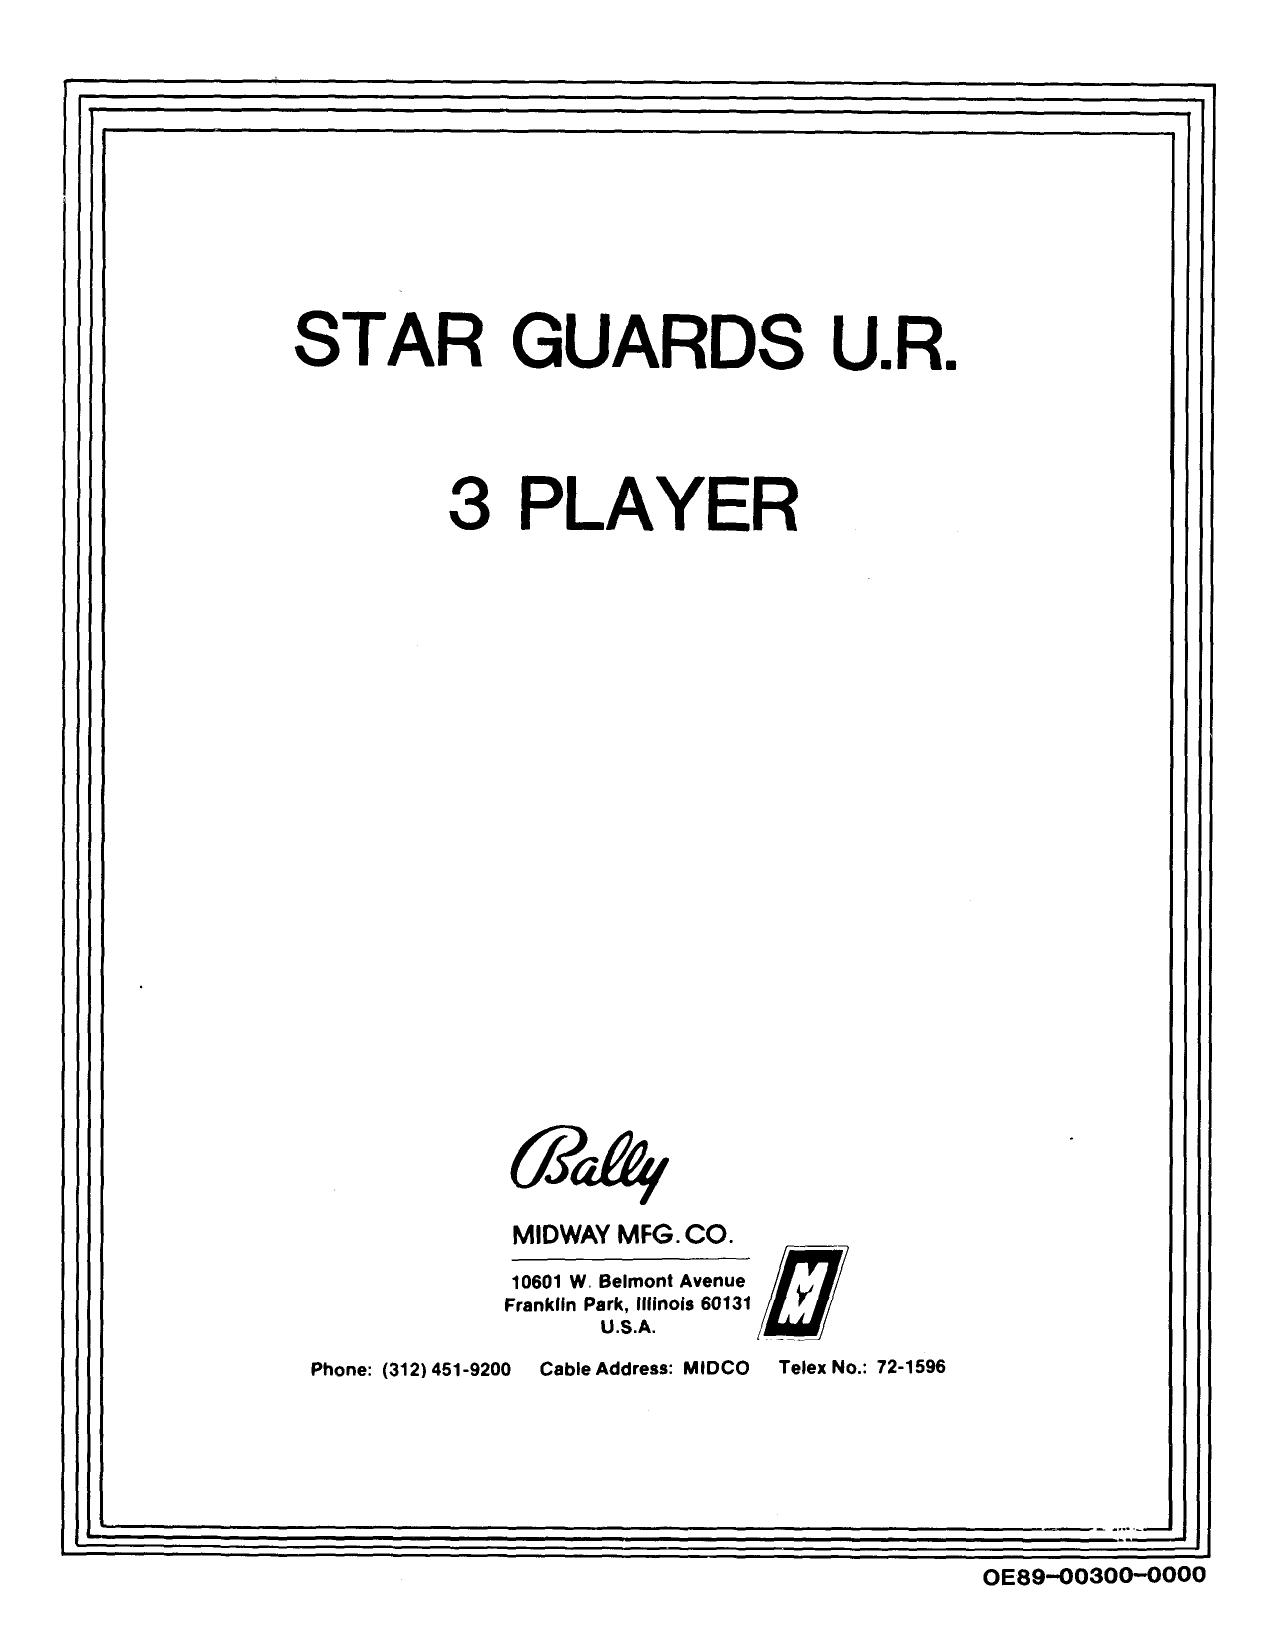 Star Guards